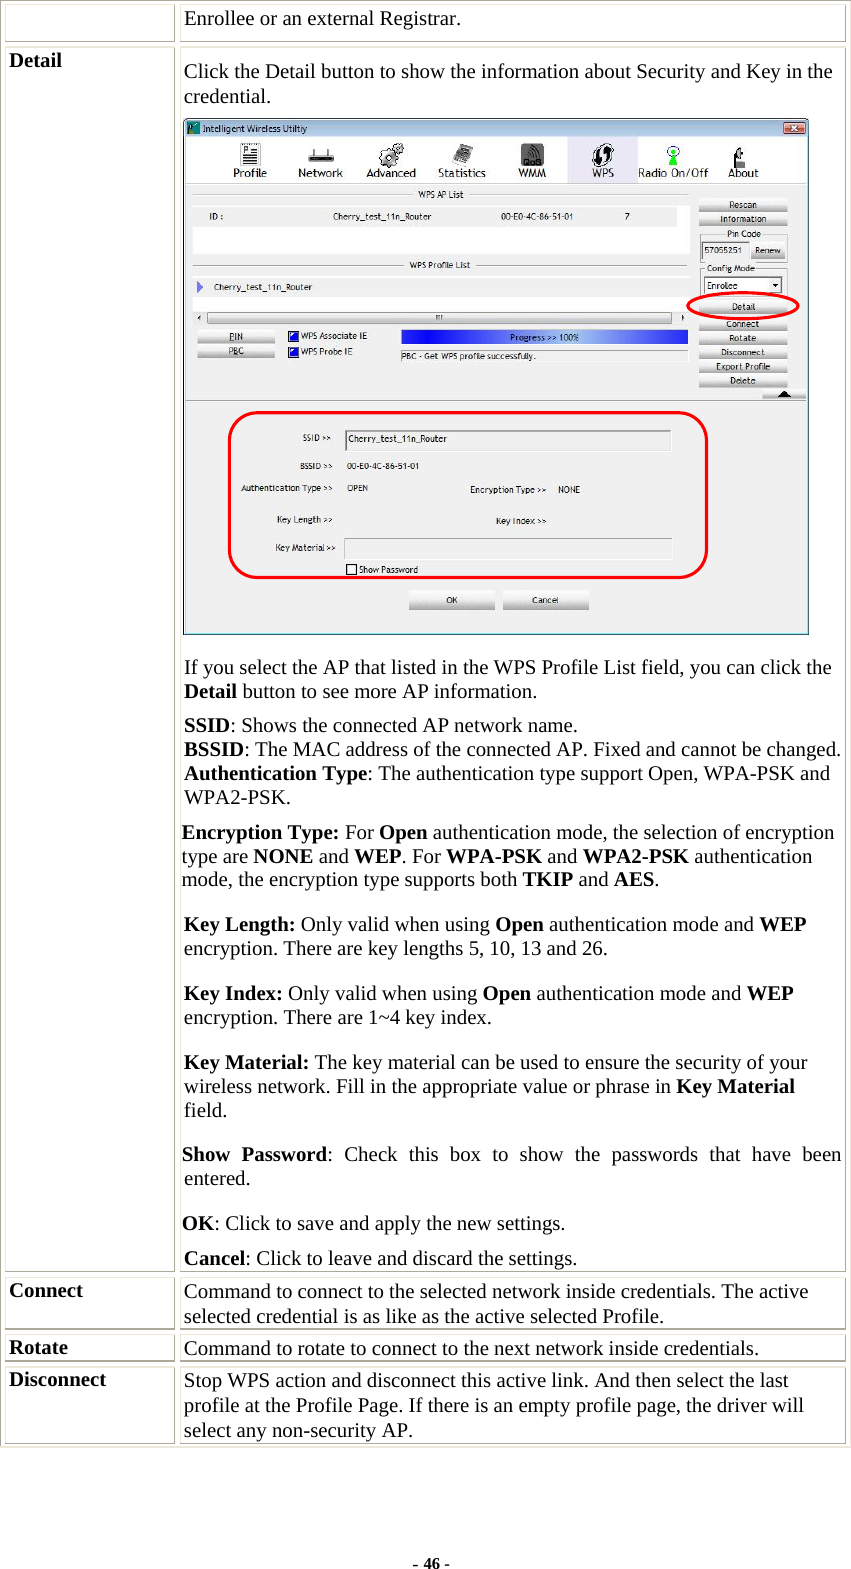  Enrollee or an external Registrar. Detail  Click the Detail button to show the information about Security and Key in the credential.  If you select the AP that listed in the WPS Profile List field, you can click the Detail button to see more AP information. SSID: Shows the connected AP network name. BSSID: The MAC address of the connected AP. Fixed and cannot be changed.Authentication Type: The authentication type support Open, WPA-PSK and WPA2-PSK.  Encryption Type: For Open authentication mode, the selection of encryption type are NONE and WEP. For WPA-PSK and WPA2-PSK authentication mode, the encryption type supports both TKIP and AES. Key Length: Only valid when using Open authentication mode and WEP encryption. There are key lengths 5, 10, 13 and 26. Key Index: Only valid when using Open authentication mode and WEP encryption. There are 1~4 key index.   Key Material: The key material can be used to ensure the security of your wireless network. Fill in the appropriate value or phrase in Key Material field.  Show Password: Check this box to show the passwords that have been entered. OK: Click to save and apply the new settings. Cancel: Click to leave and discard the settings. Connect  Command to connect to the selected network inside credentials. The active selected credential is as like as the active selected Profile. Rotate  Command to rotate to connect to the next network inside credentials. Disconnect  Stop WPS action and disconnect this active link. And then select the last profile at the Profile Page. If there is an empty profile page, the driver will select any non-security AP. - 46 - 